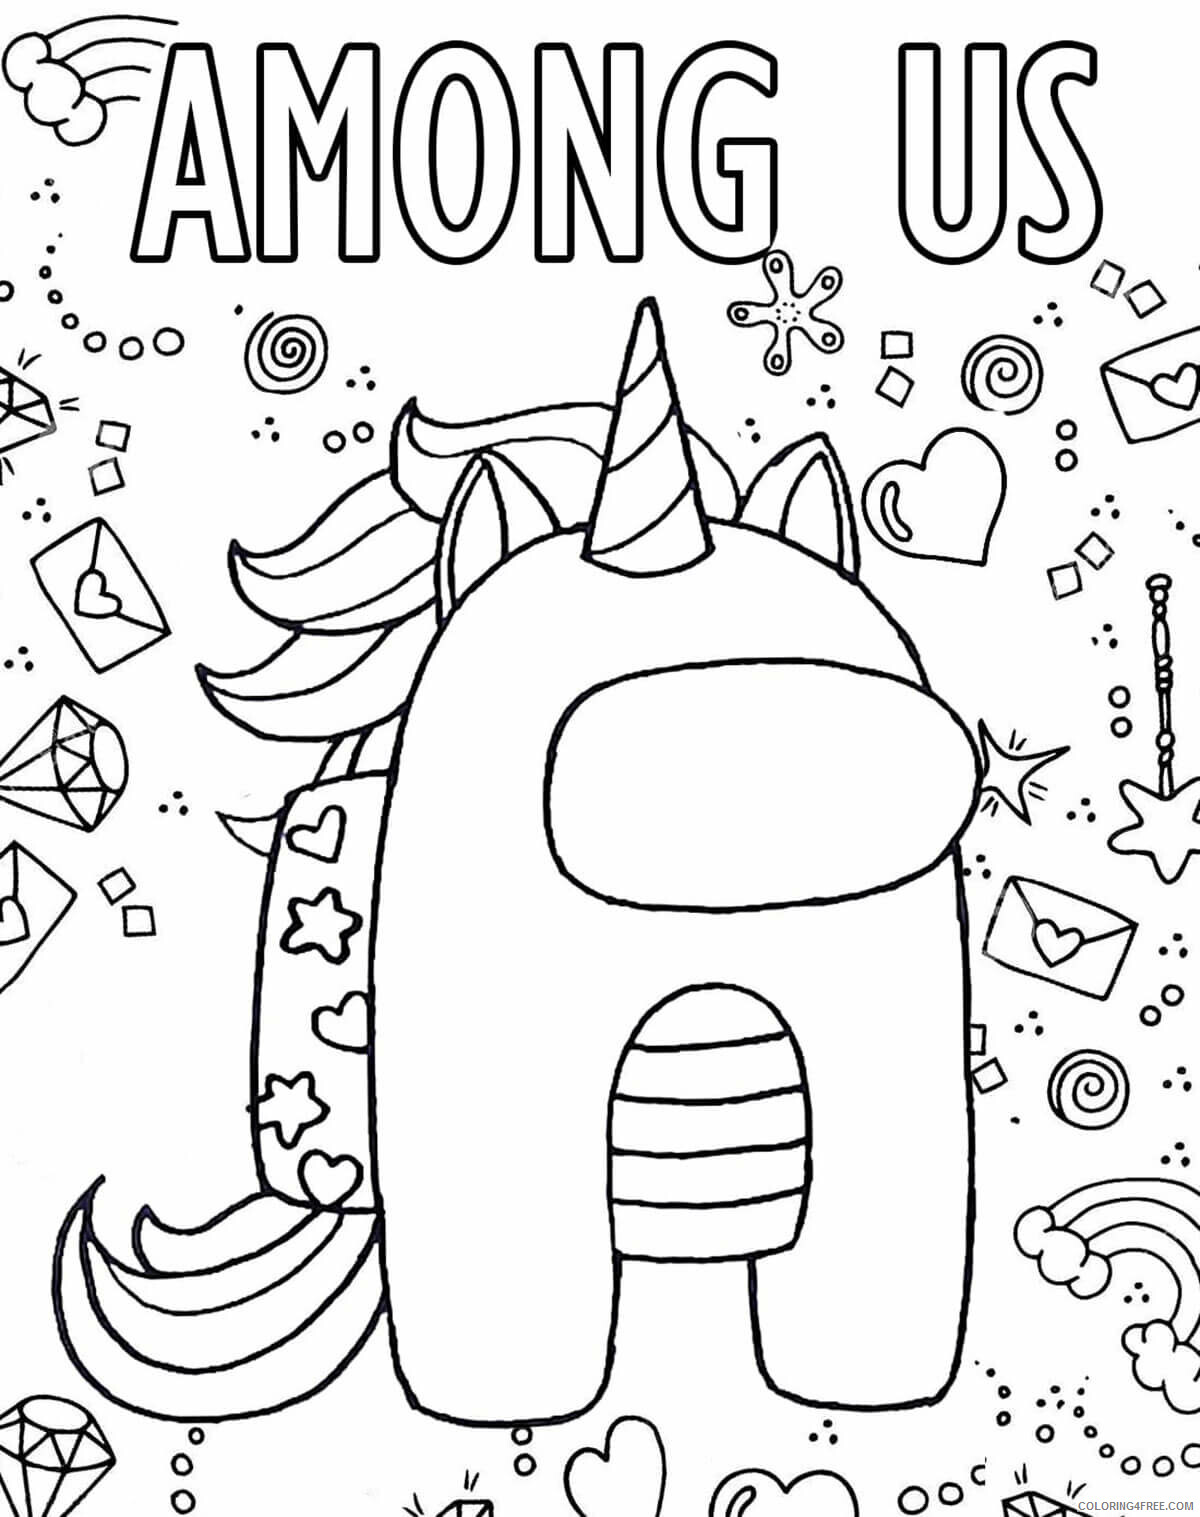 Among Us Coloring Pages Printable Sheets Among Us Unicorn Page 2021 a 5557 Coloring4free